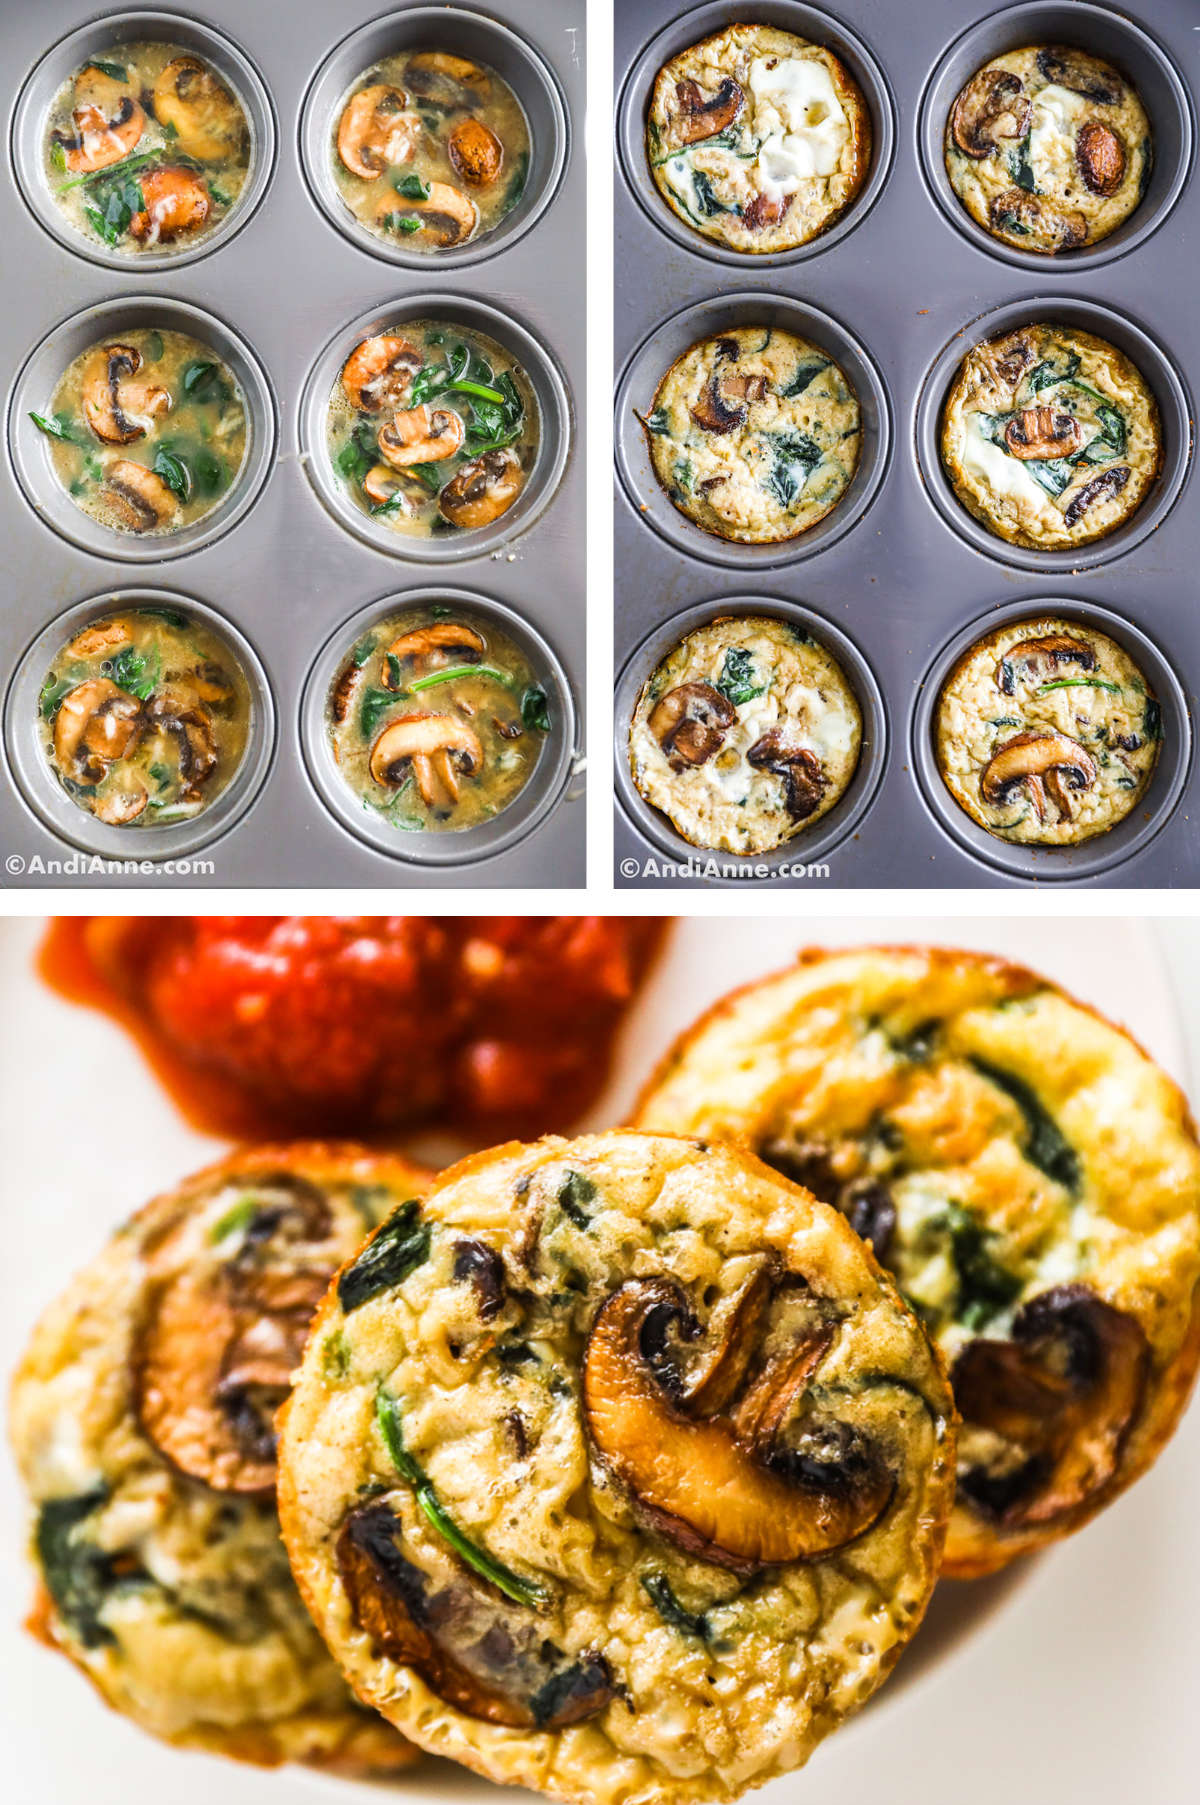 Three overhead images in one: 1. Ingredients are added to a muffin tin. 2. Muffins are baked. 3. Closeup of baked muffins stacked. 